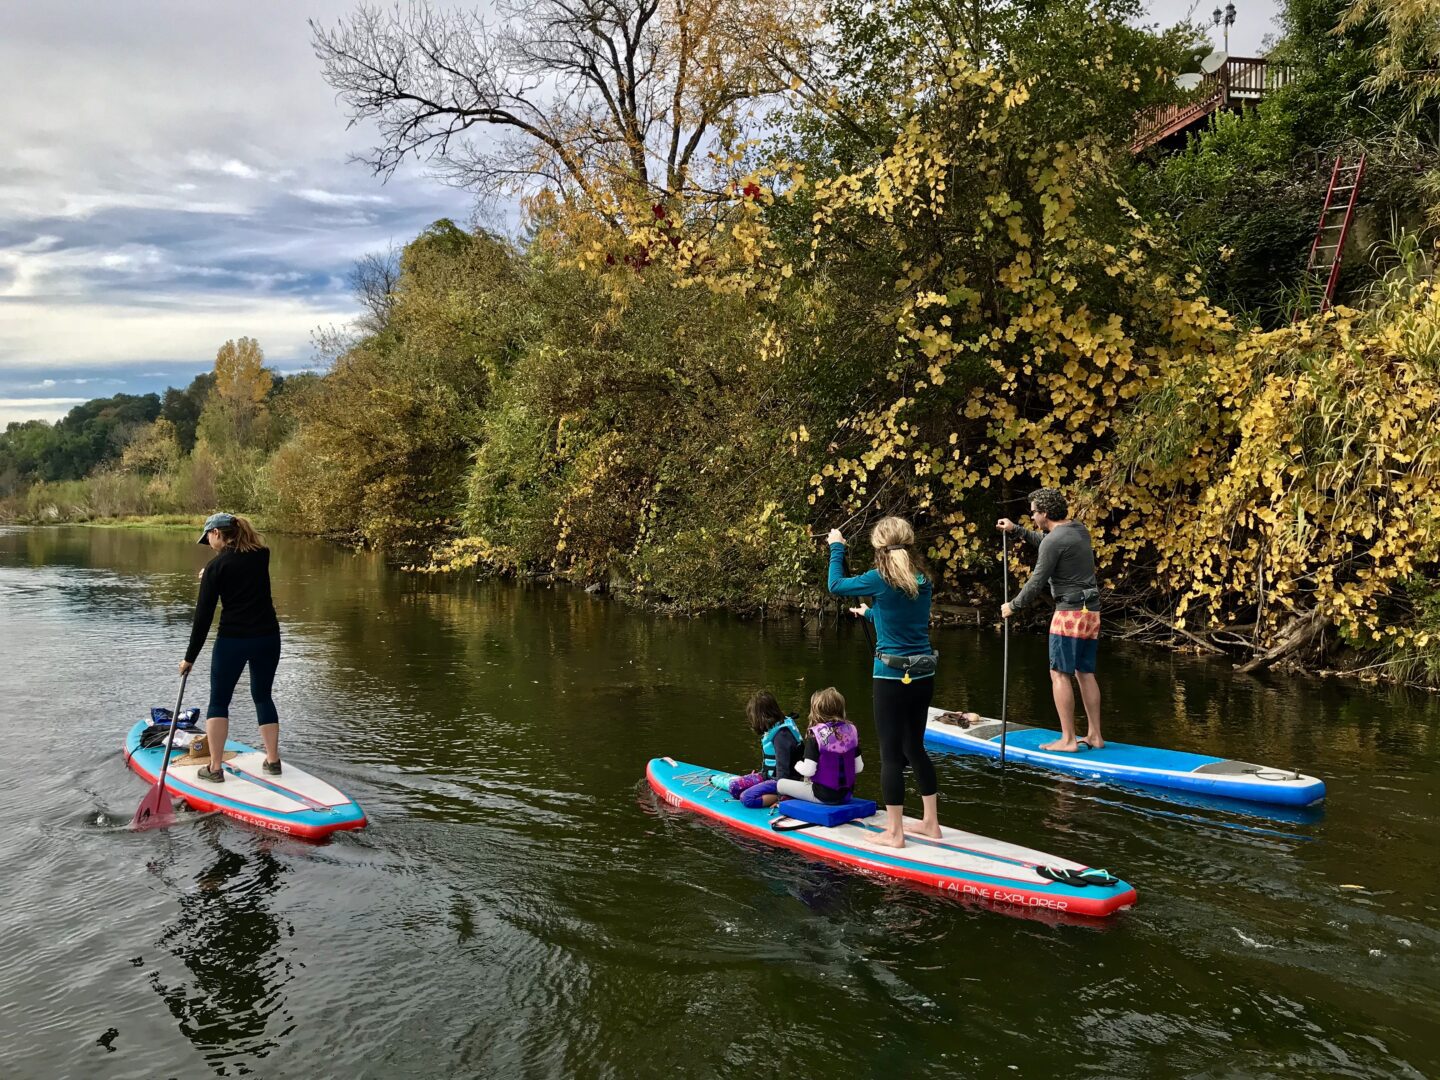 Children and adults on a paddleboard tour